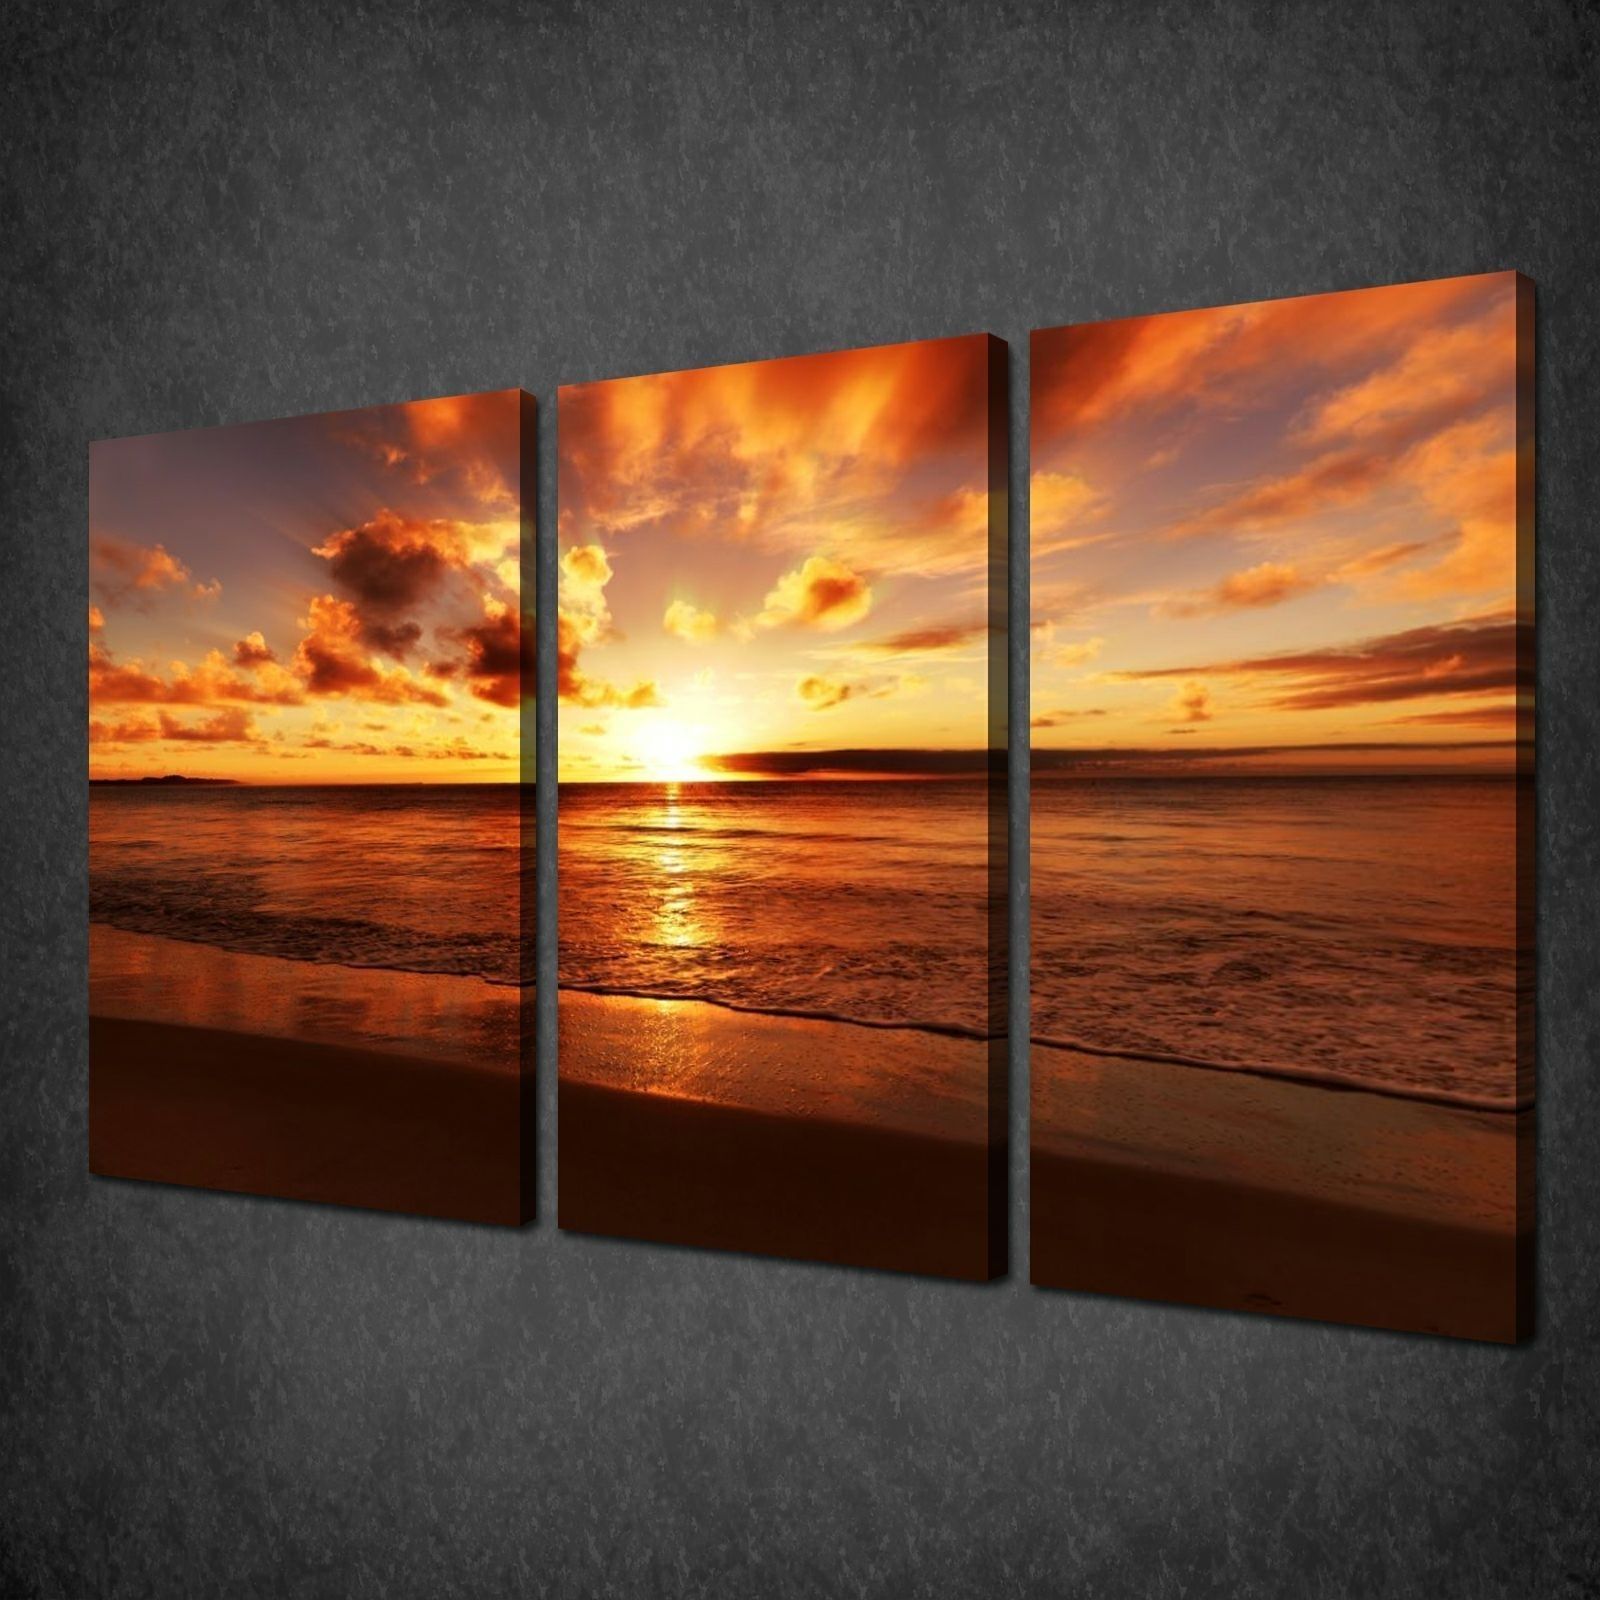 Canvas Print Pictures. High Quality, Handmade, Free Next Day Delivery (View 14 of 15)